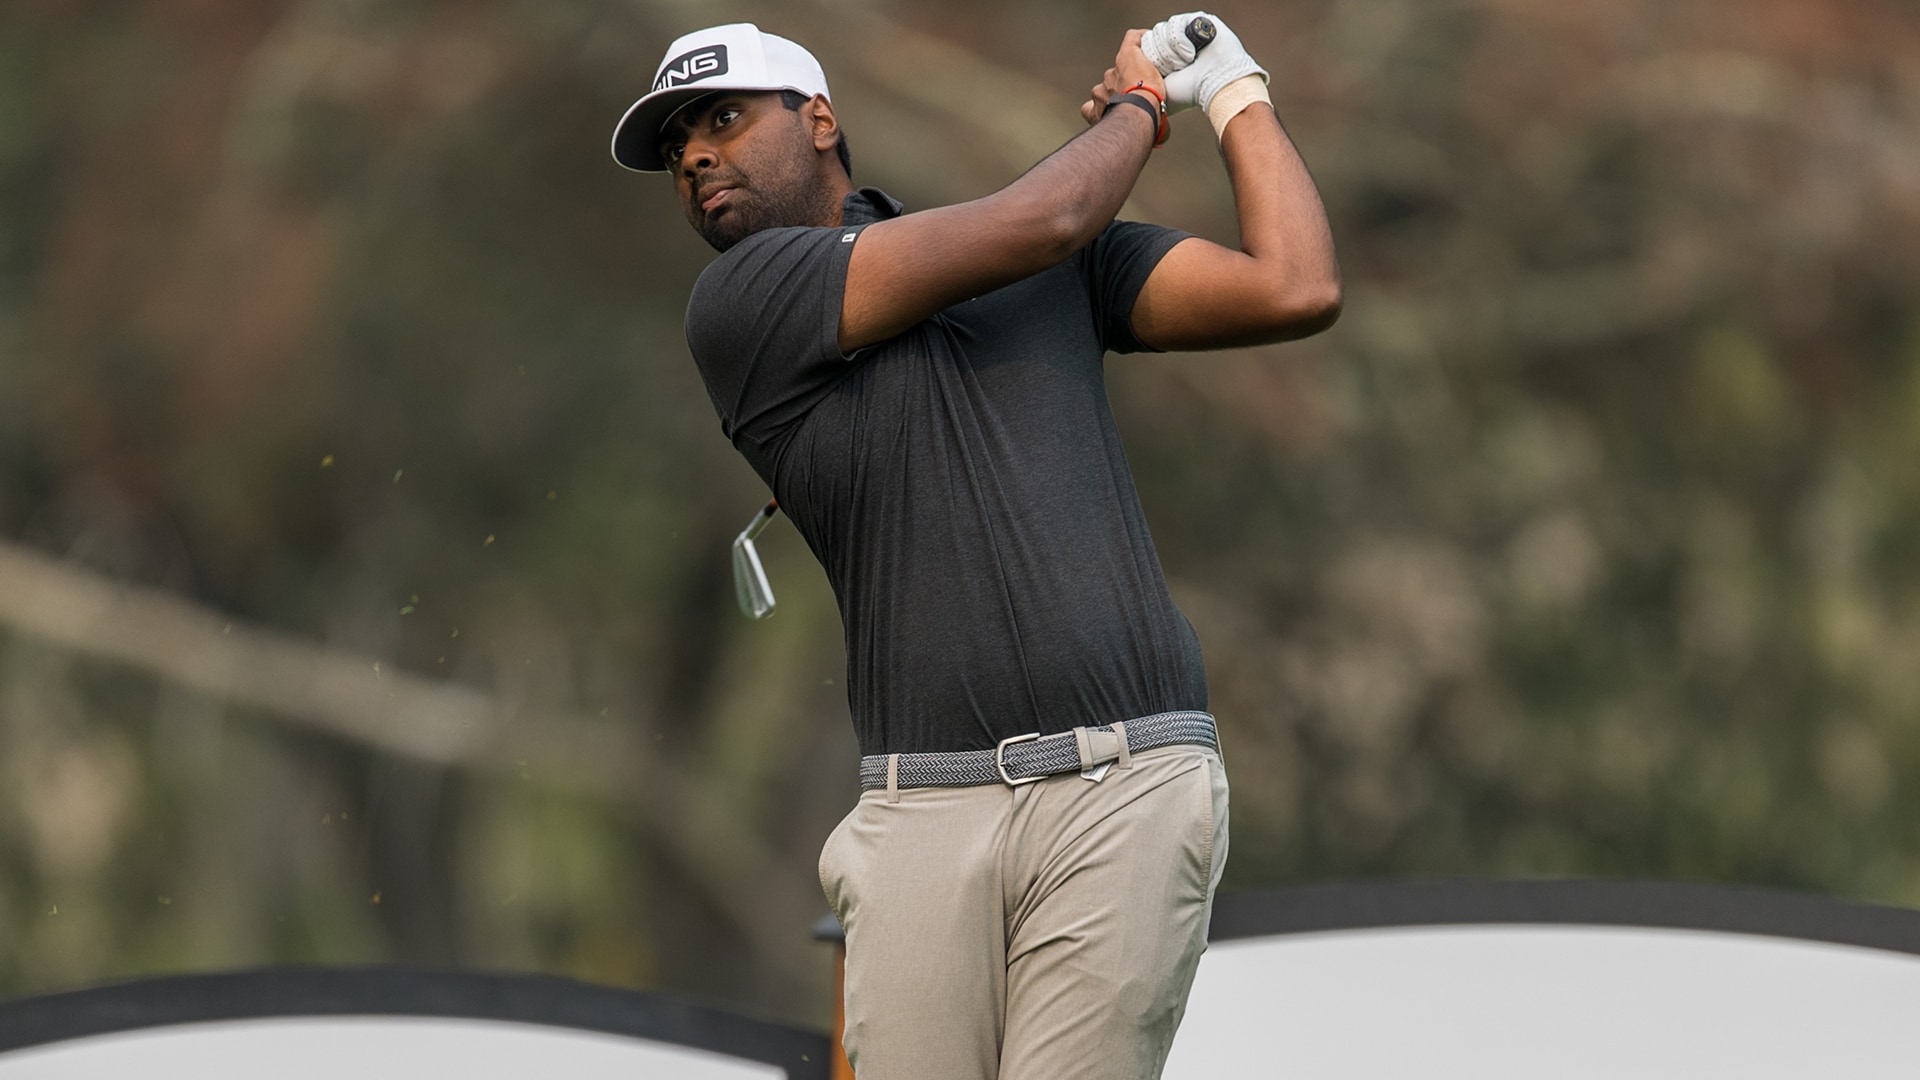 Feeling more comfortable on Tour, Sahith Theegala fires 64 at Safeway Open